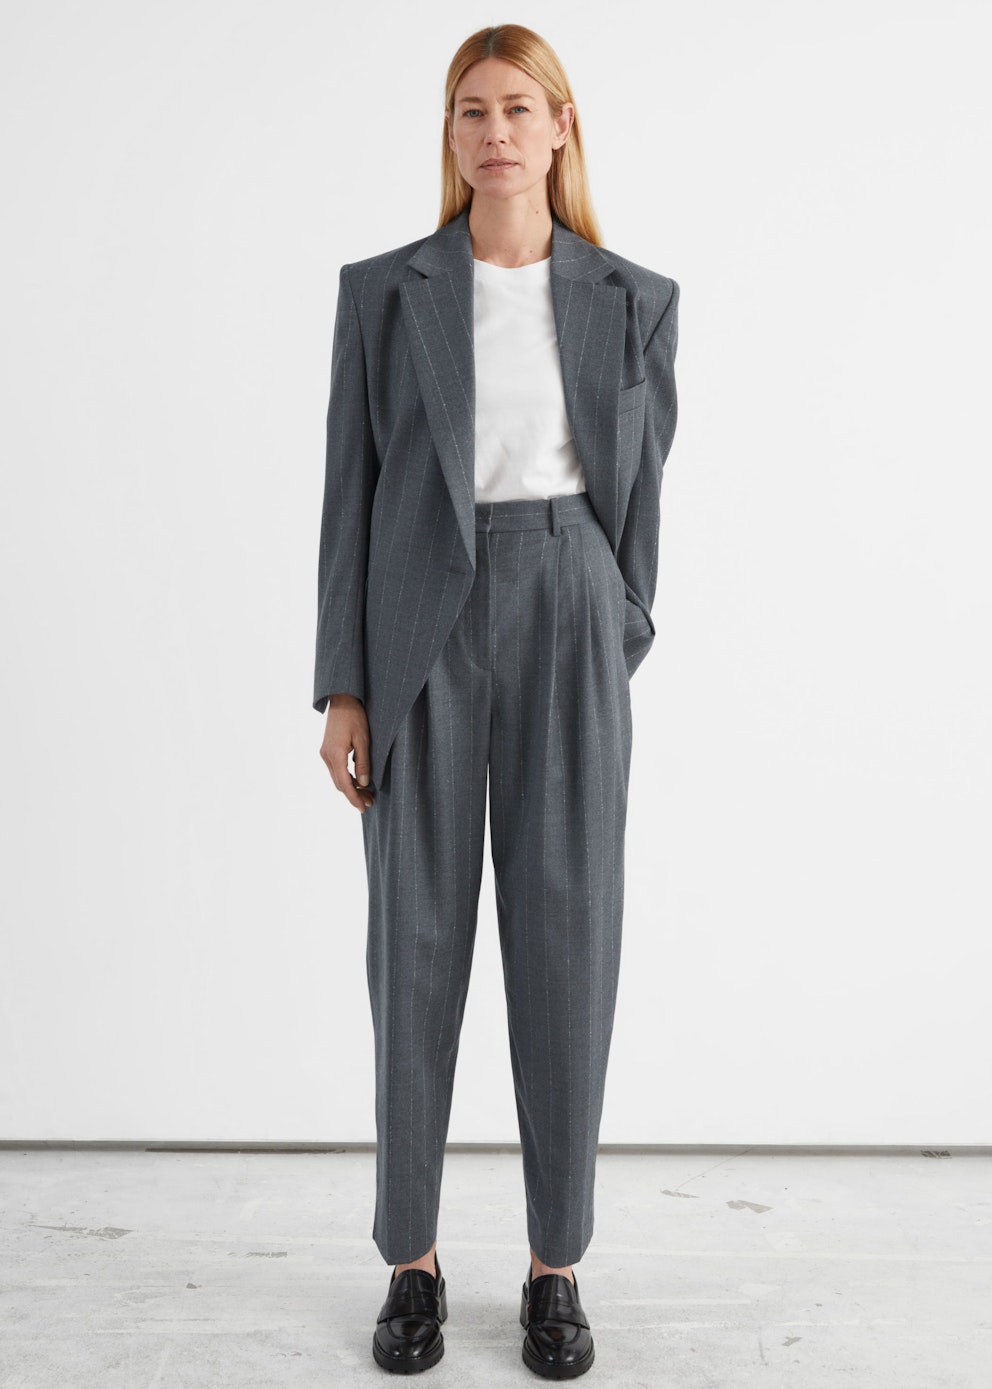 & Other Stories Best Pieces To Buy 2021 – Grazia